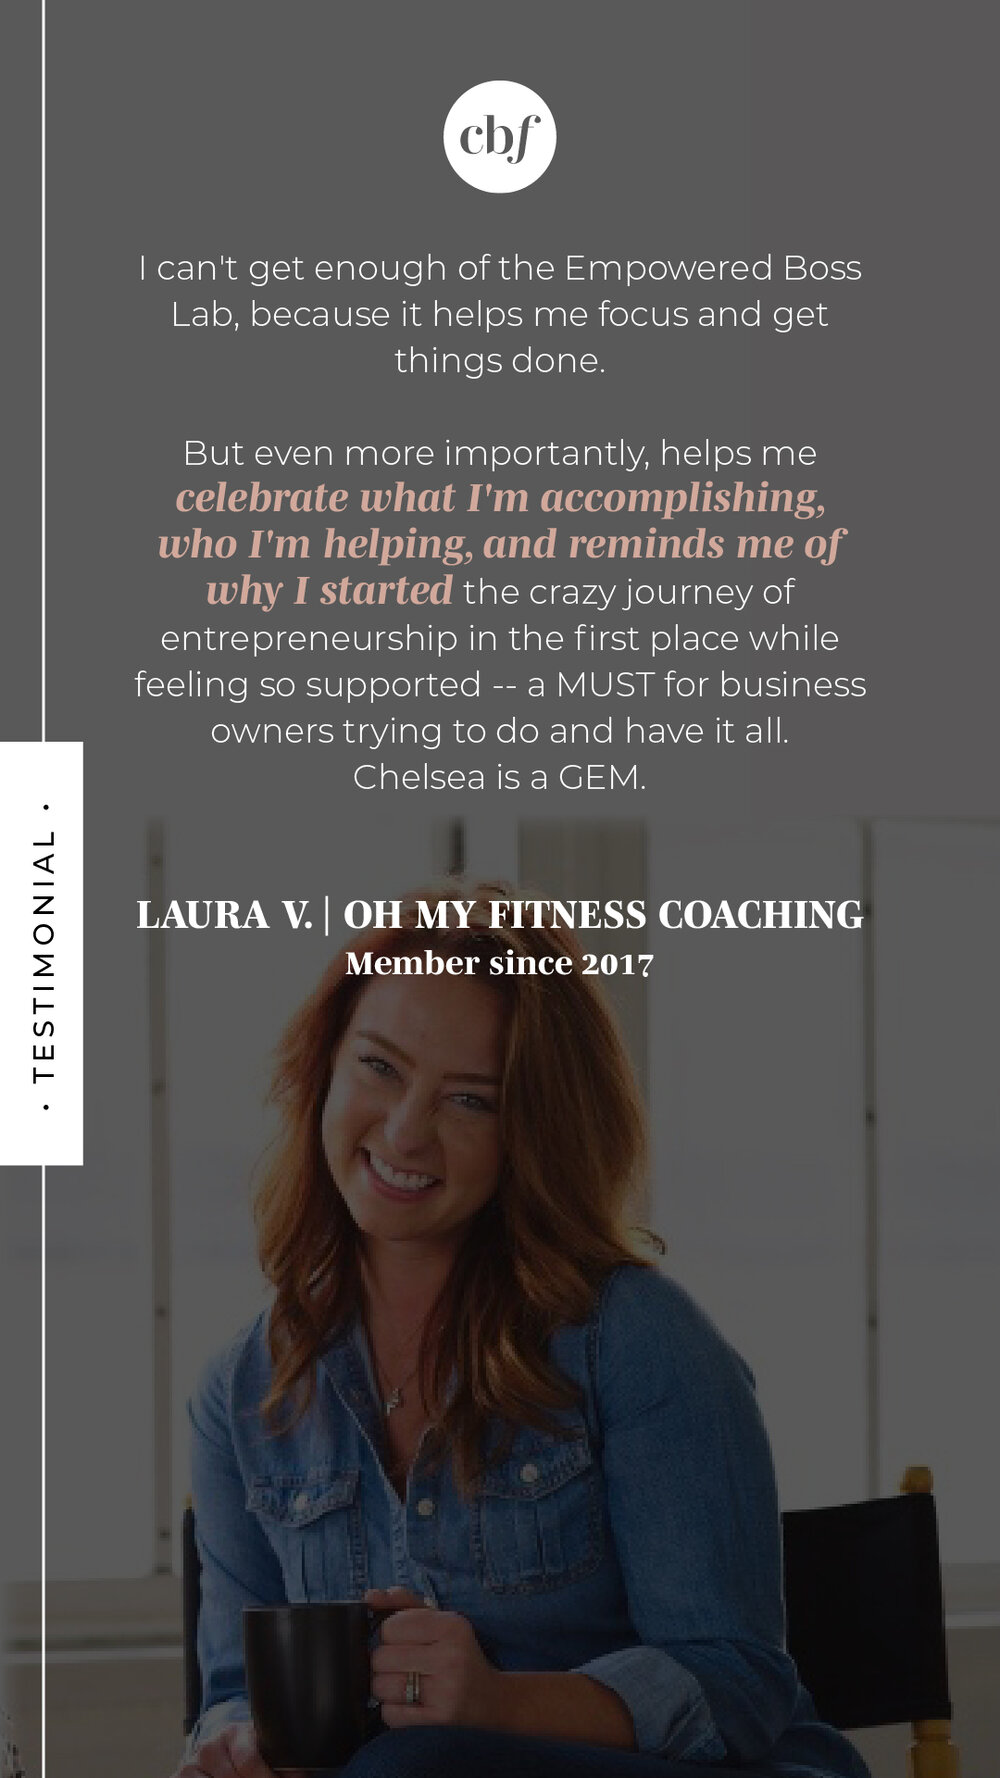 The Empowered Boss Lab by Chelsea B Foster | Testimonial from Laura Voss of Oh My Fitness Coaching, member since 2018